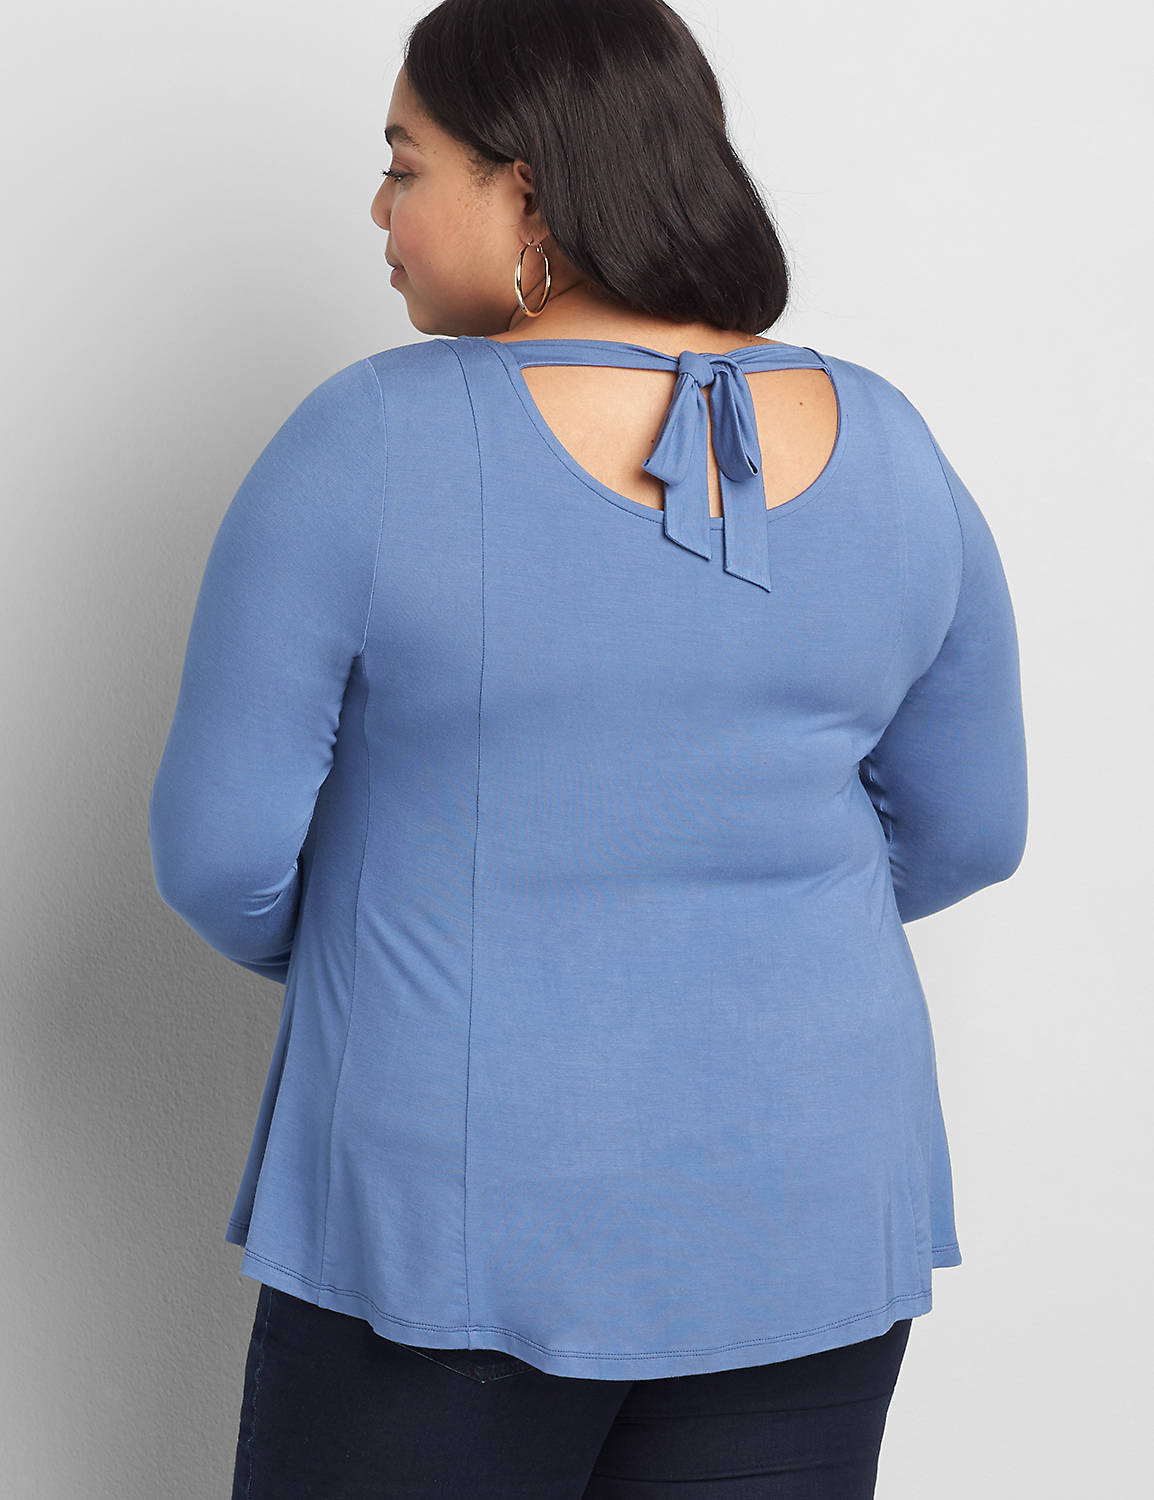 Boatneck Back-Tie Fit & Flare Top Product Image 2